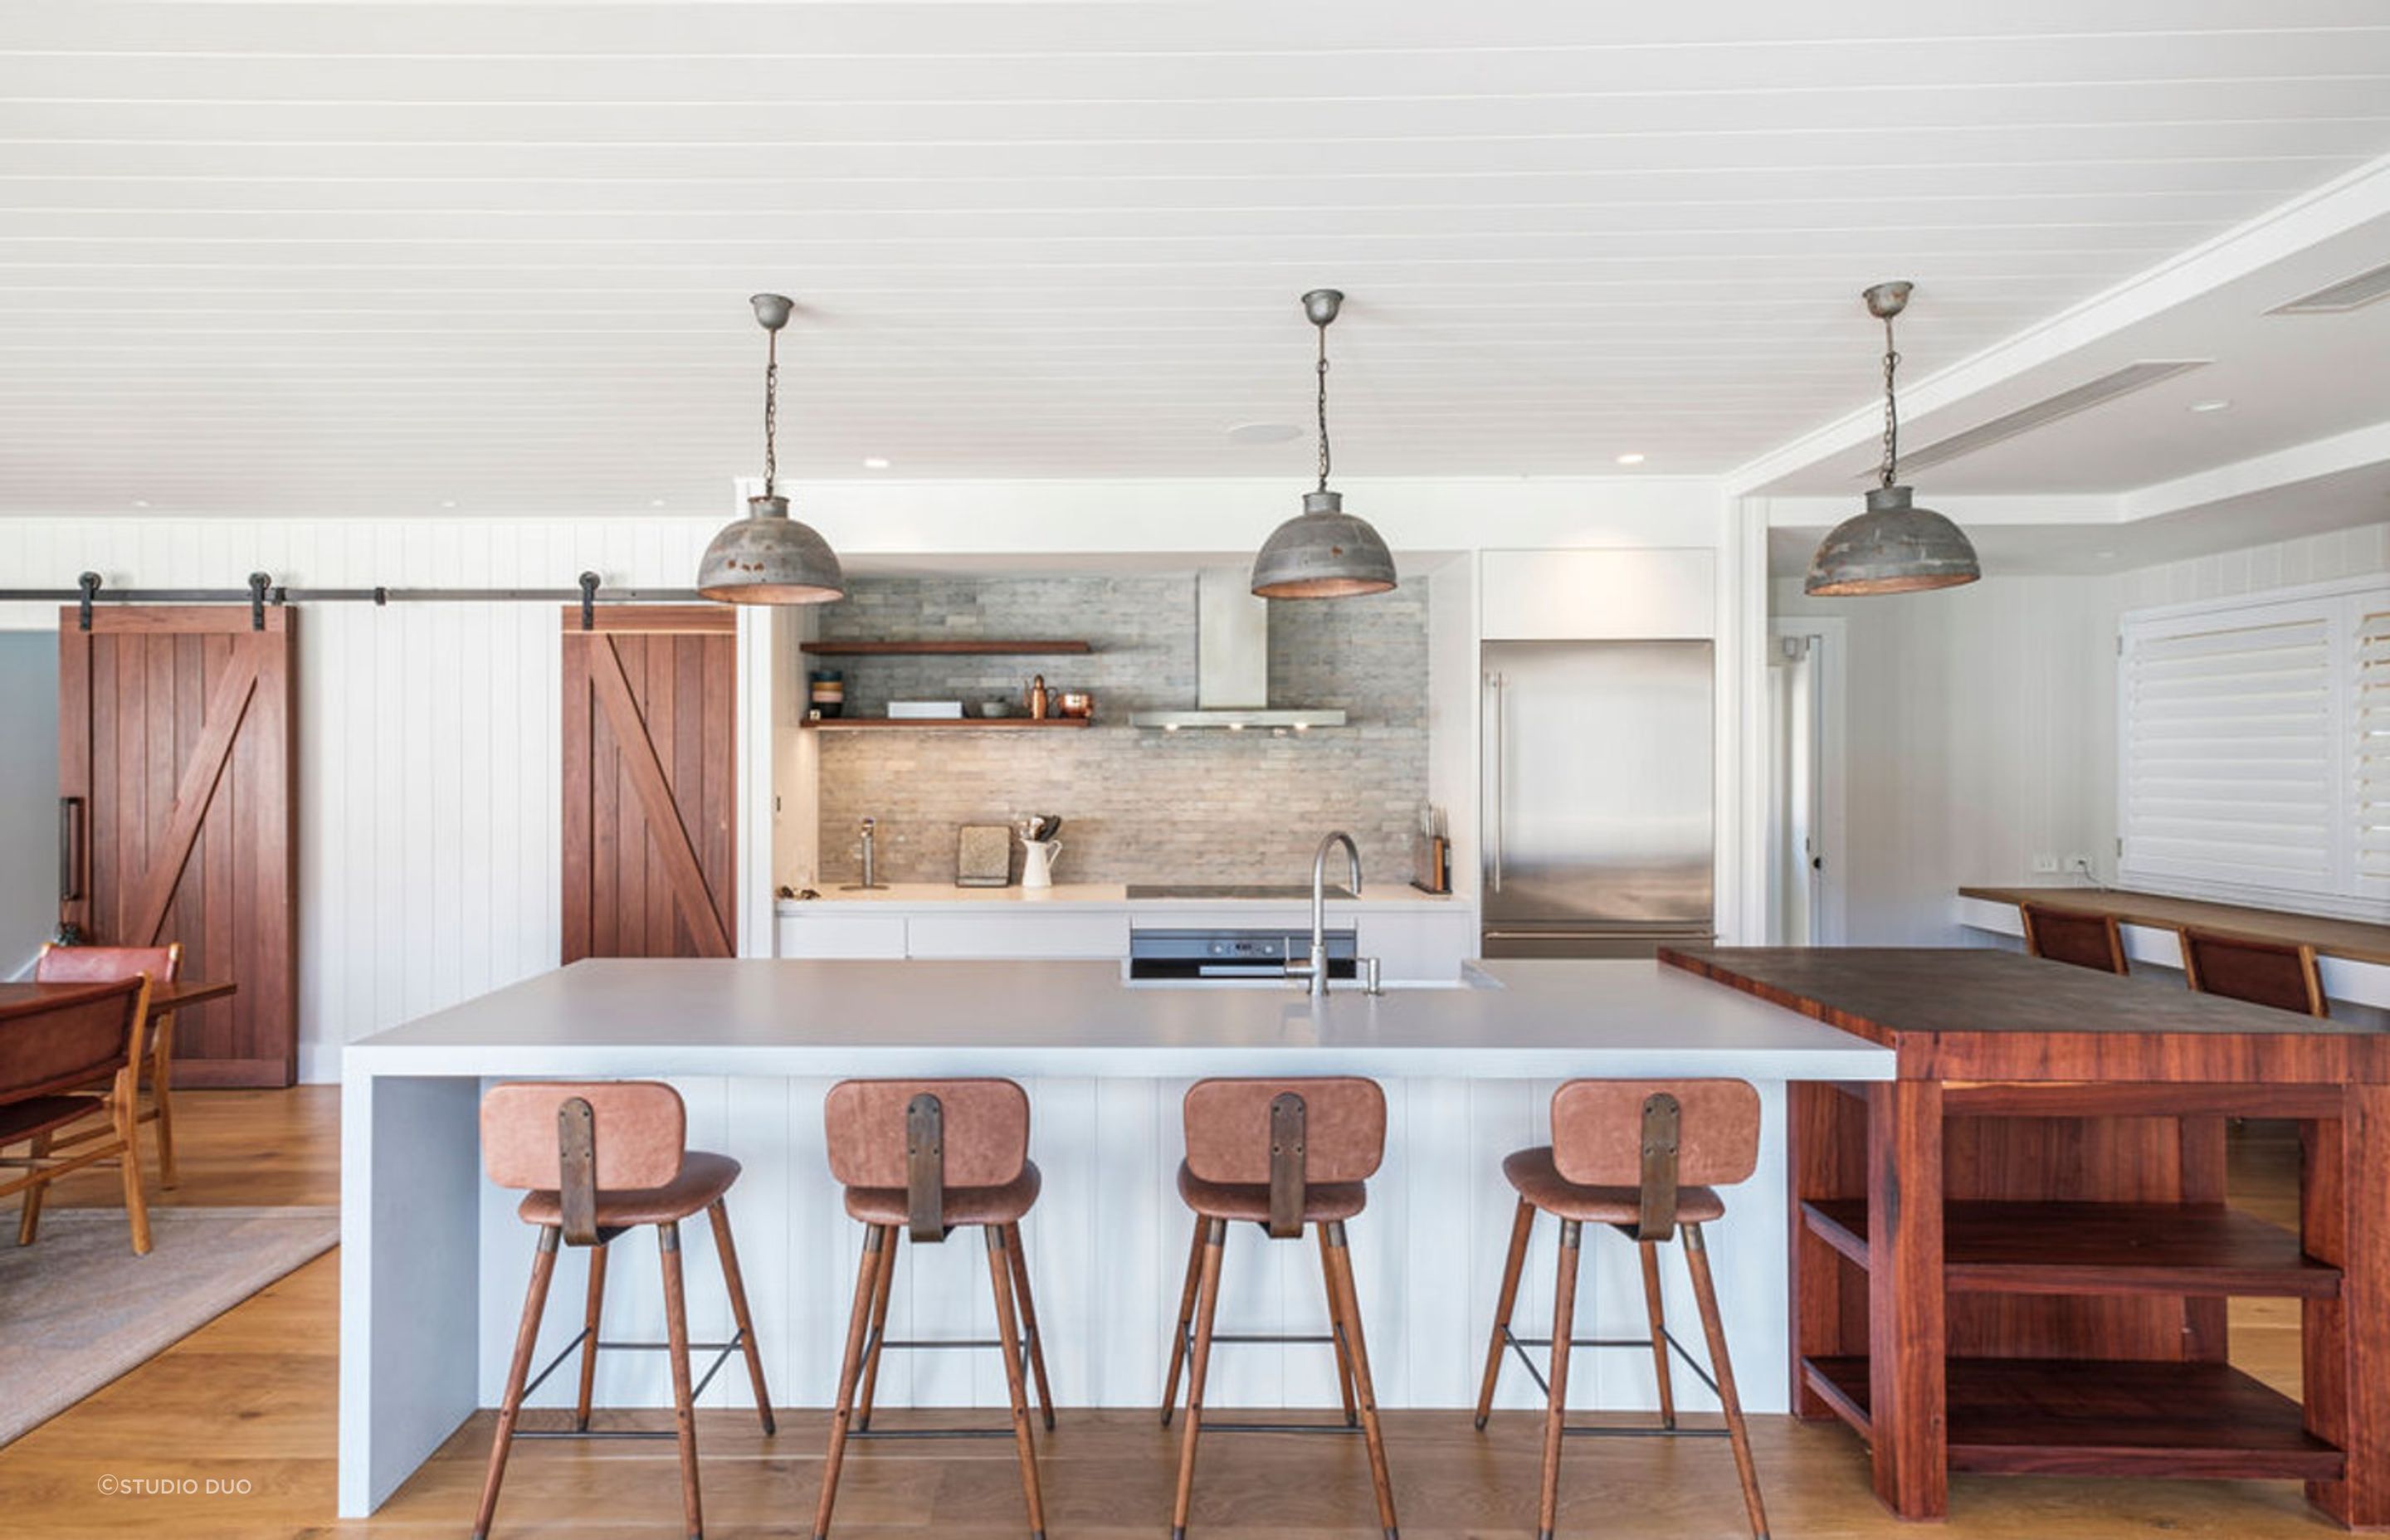 Industrial or farmhouse pendant lights add a rustic appeal to a kitchen.